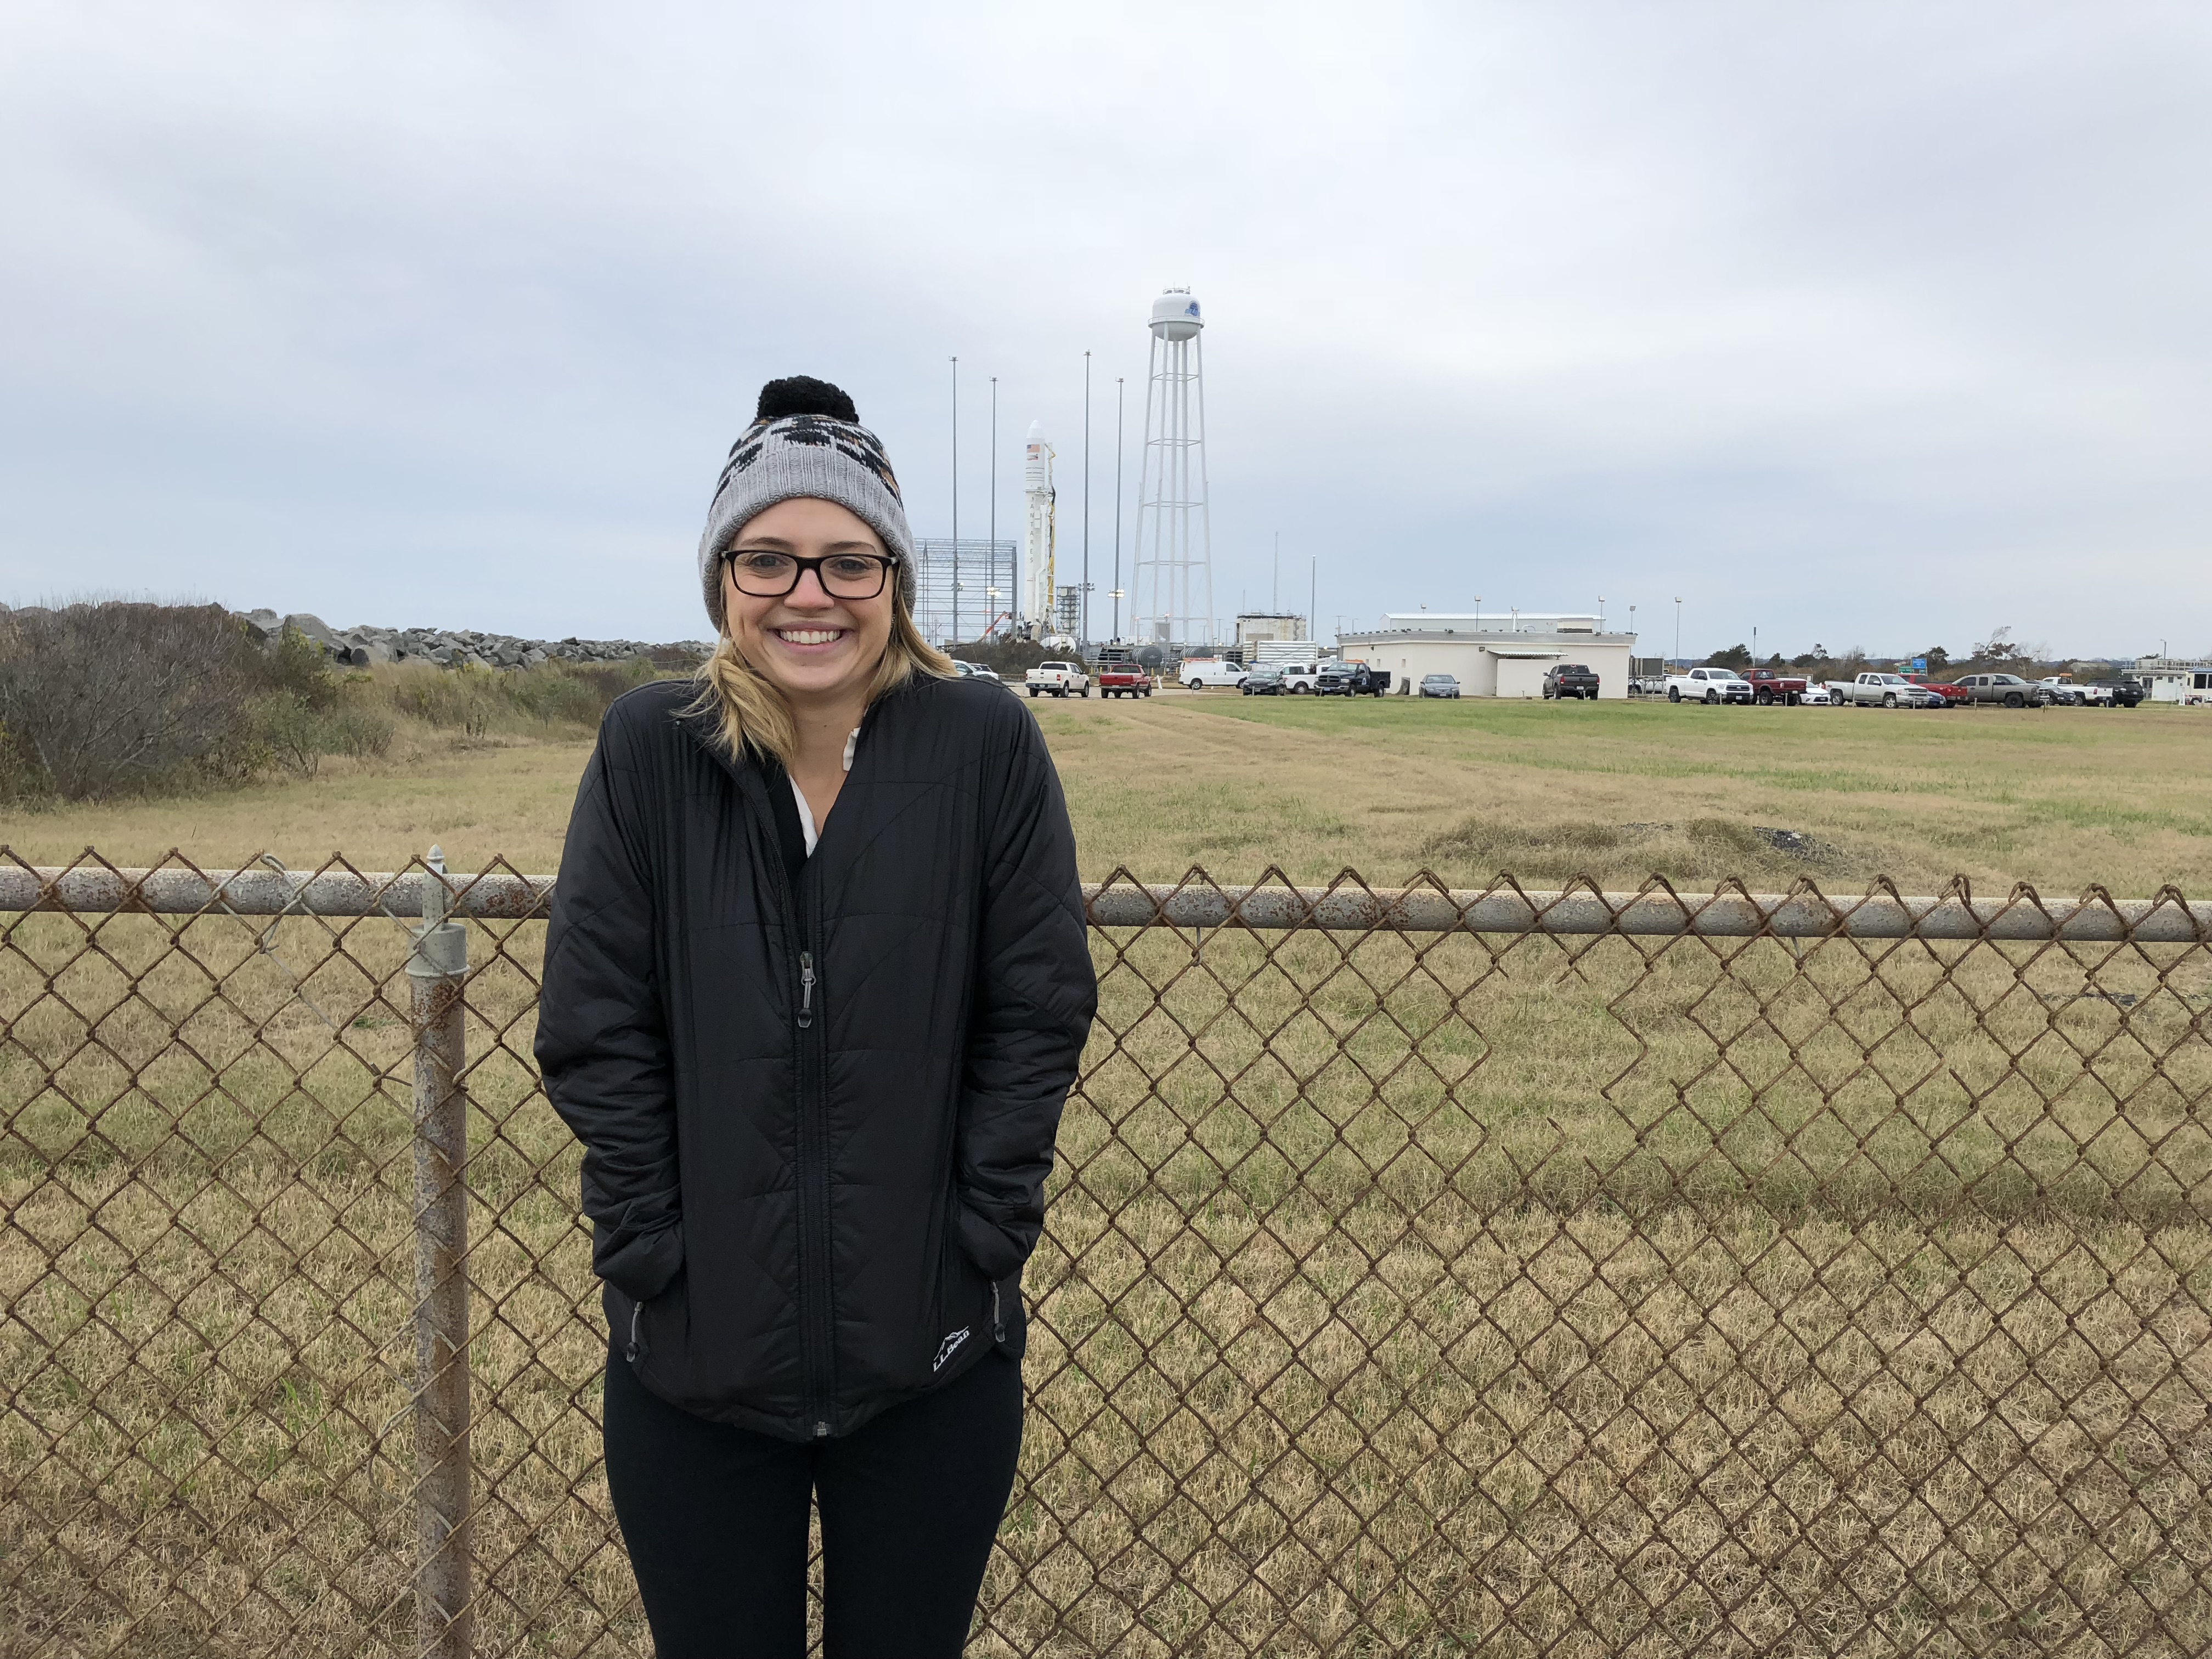 Smiling woman in front of rocket on launch pad.